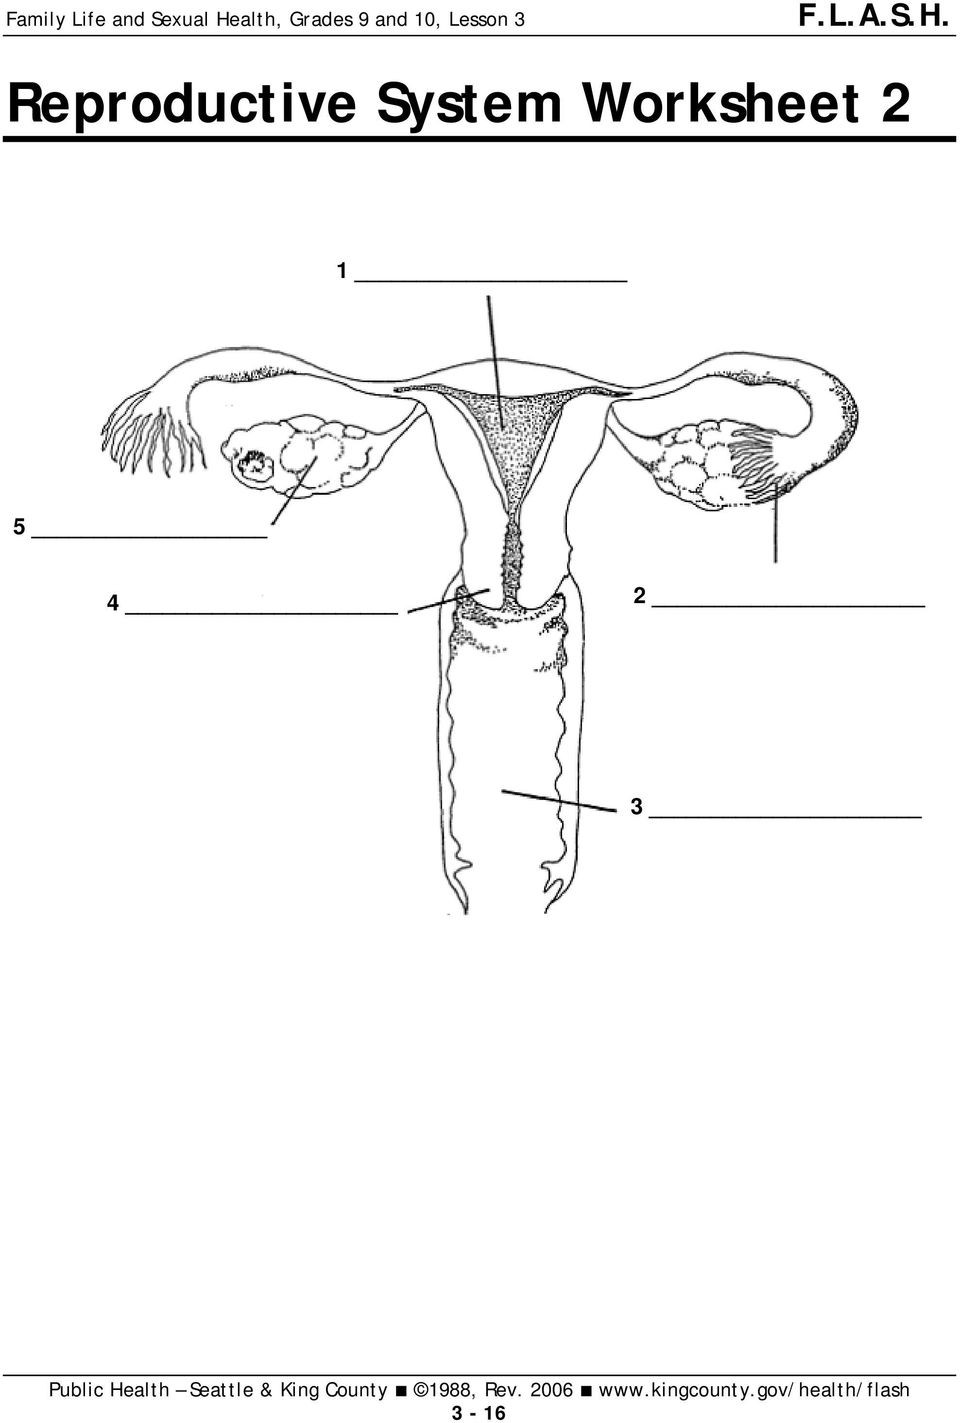 The Female Reproductive System Worksheet Reproductive System Grades 9 and 10 Lesson 3 Pdf Free